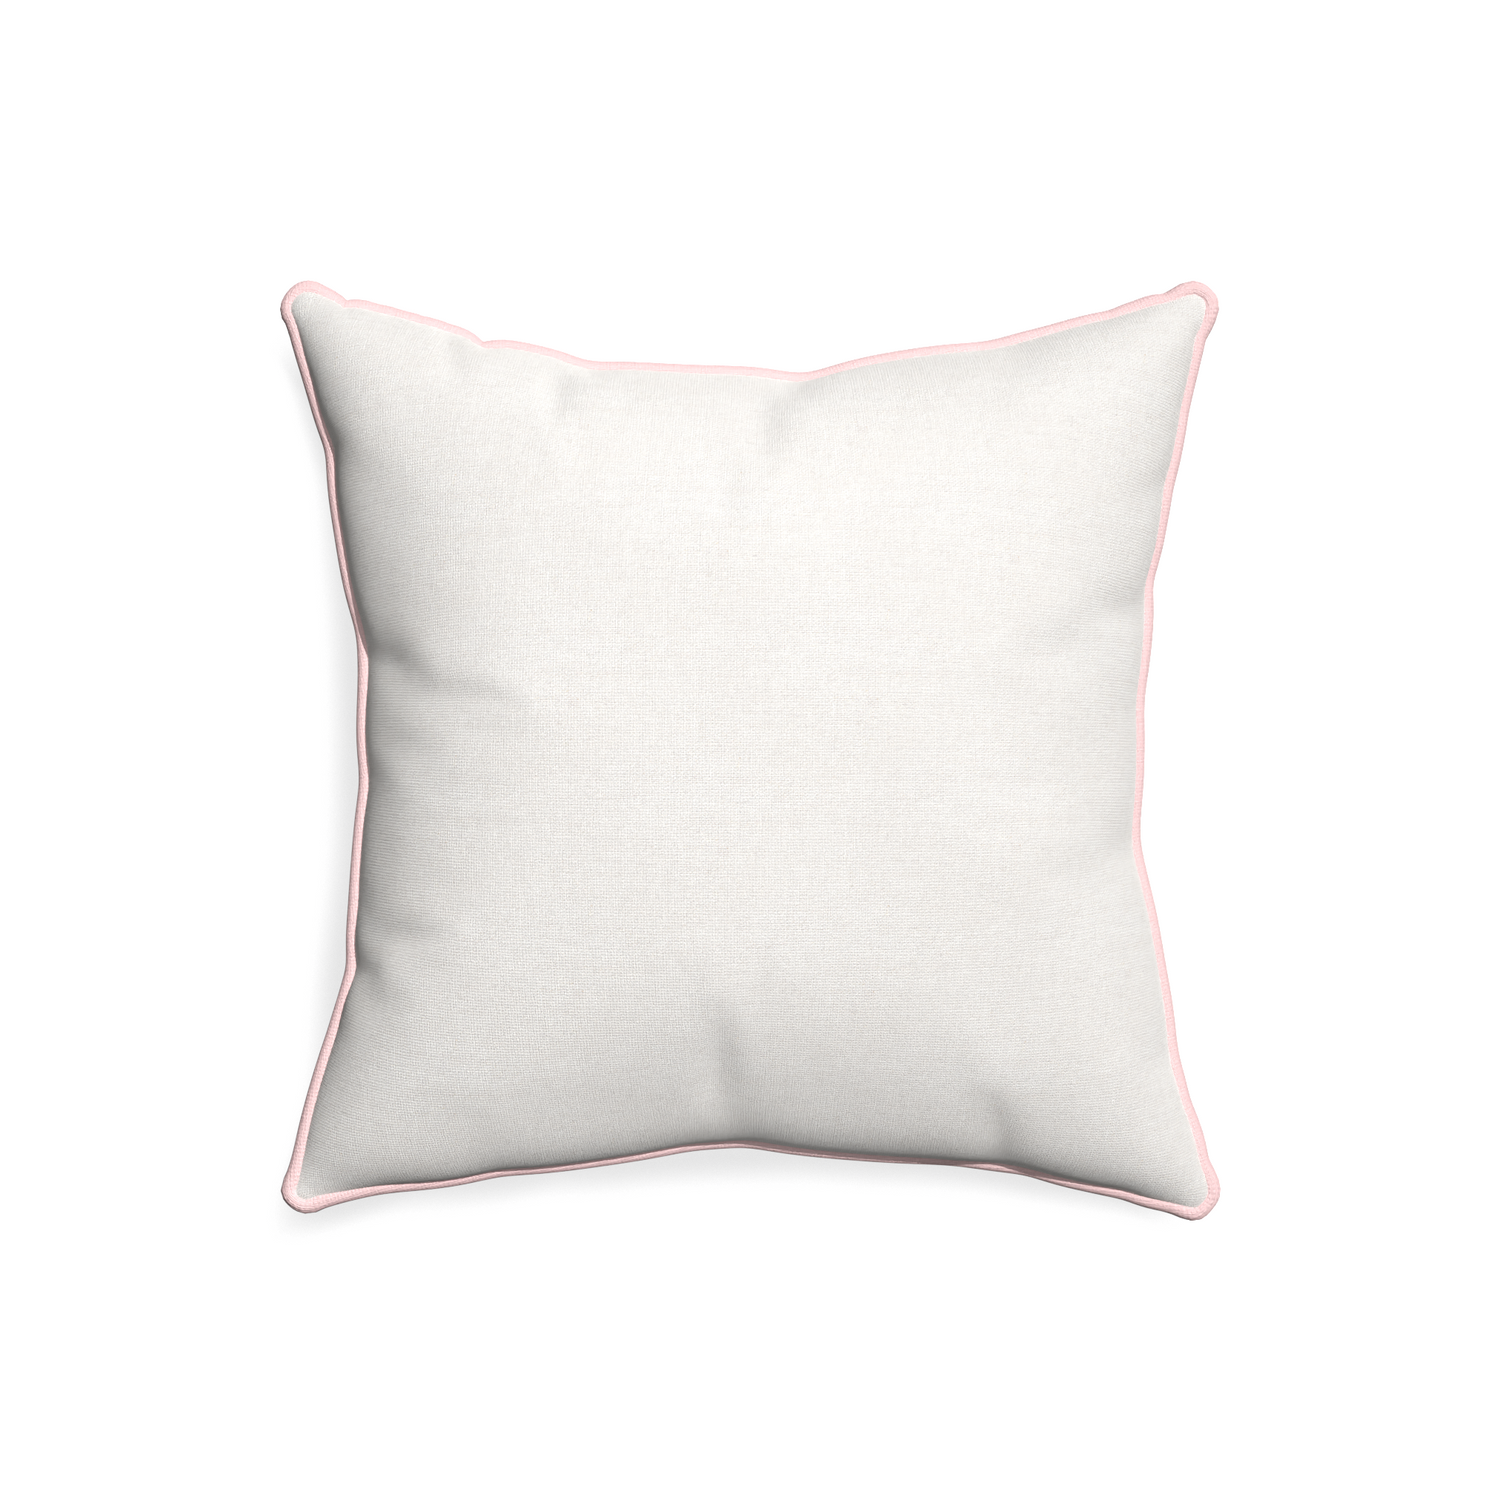 20-square flour custom pillow with petal piping on white background